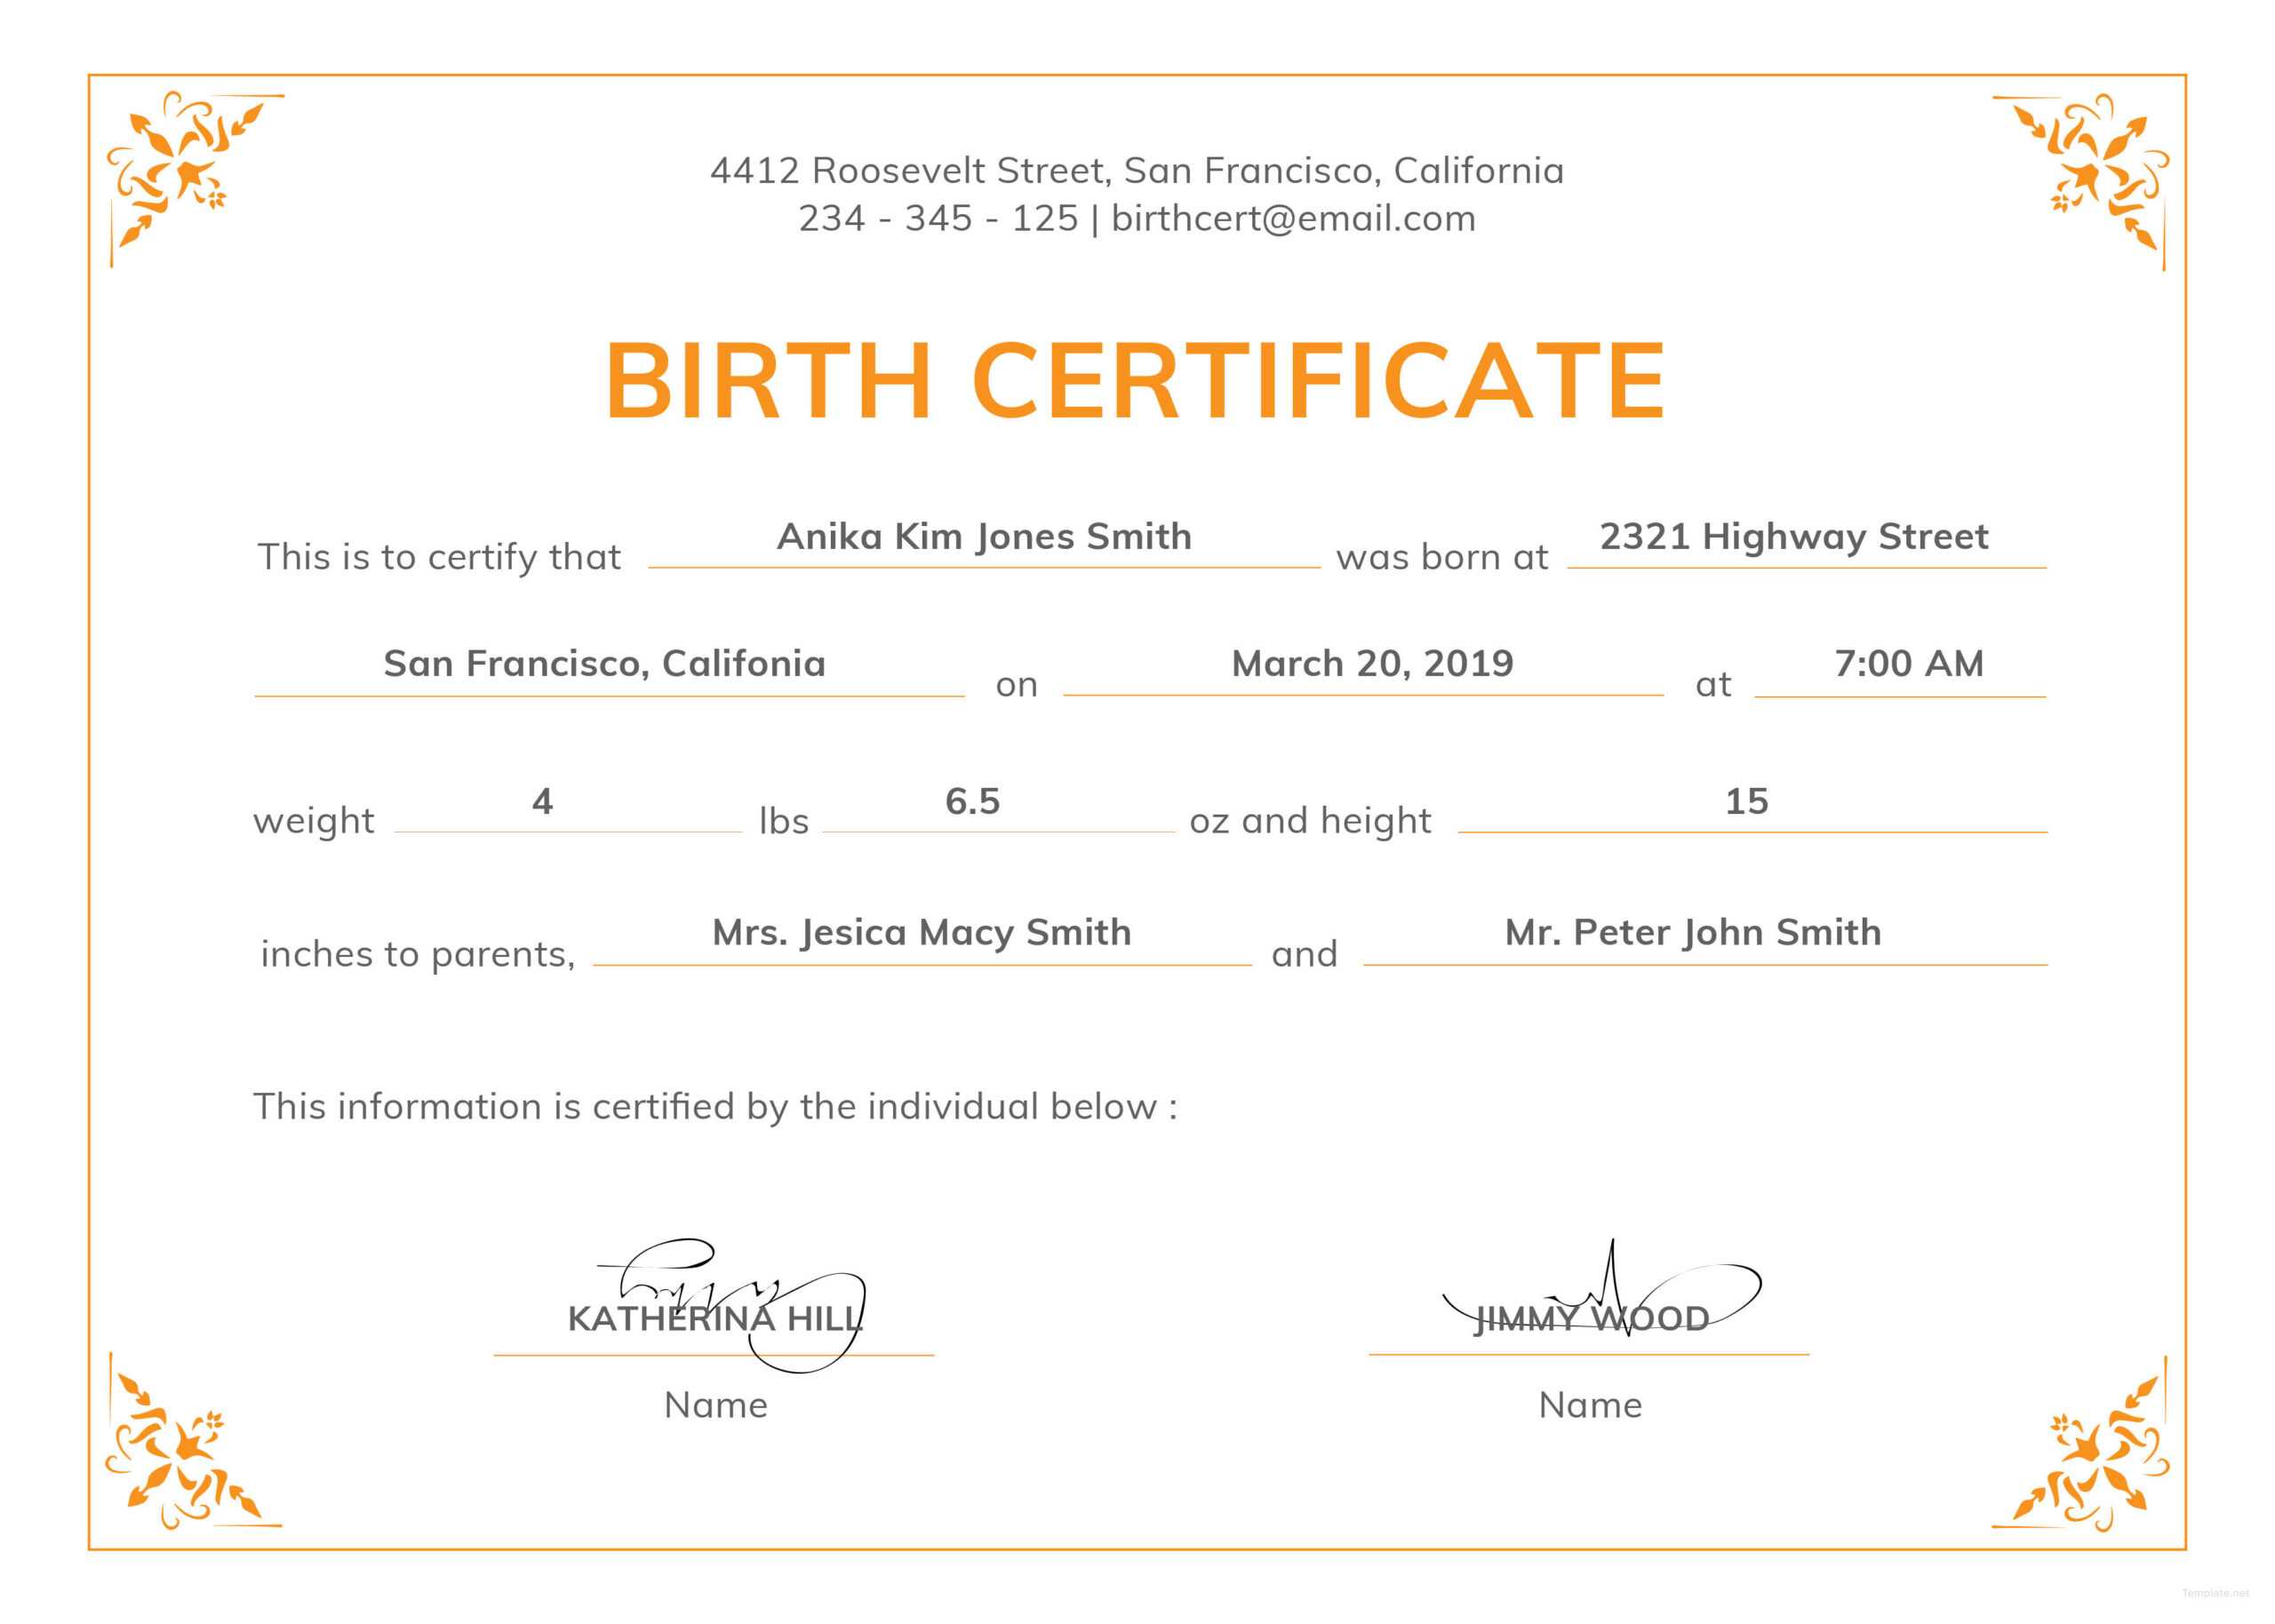 Can Make A Delivery Certificate Crucial | Gift Certificate With Regard To Birth Certificate Template Uk